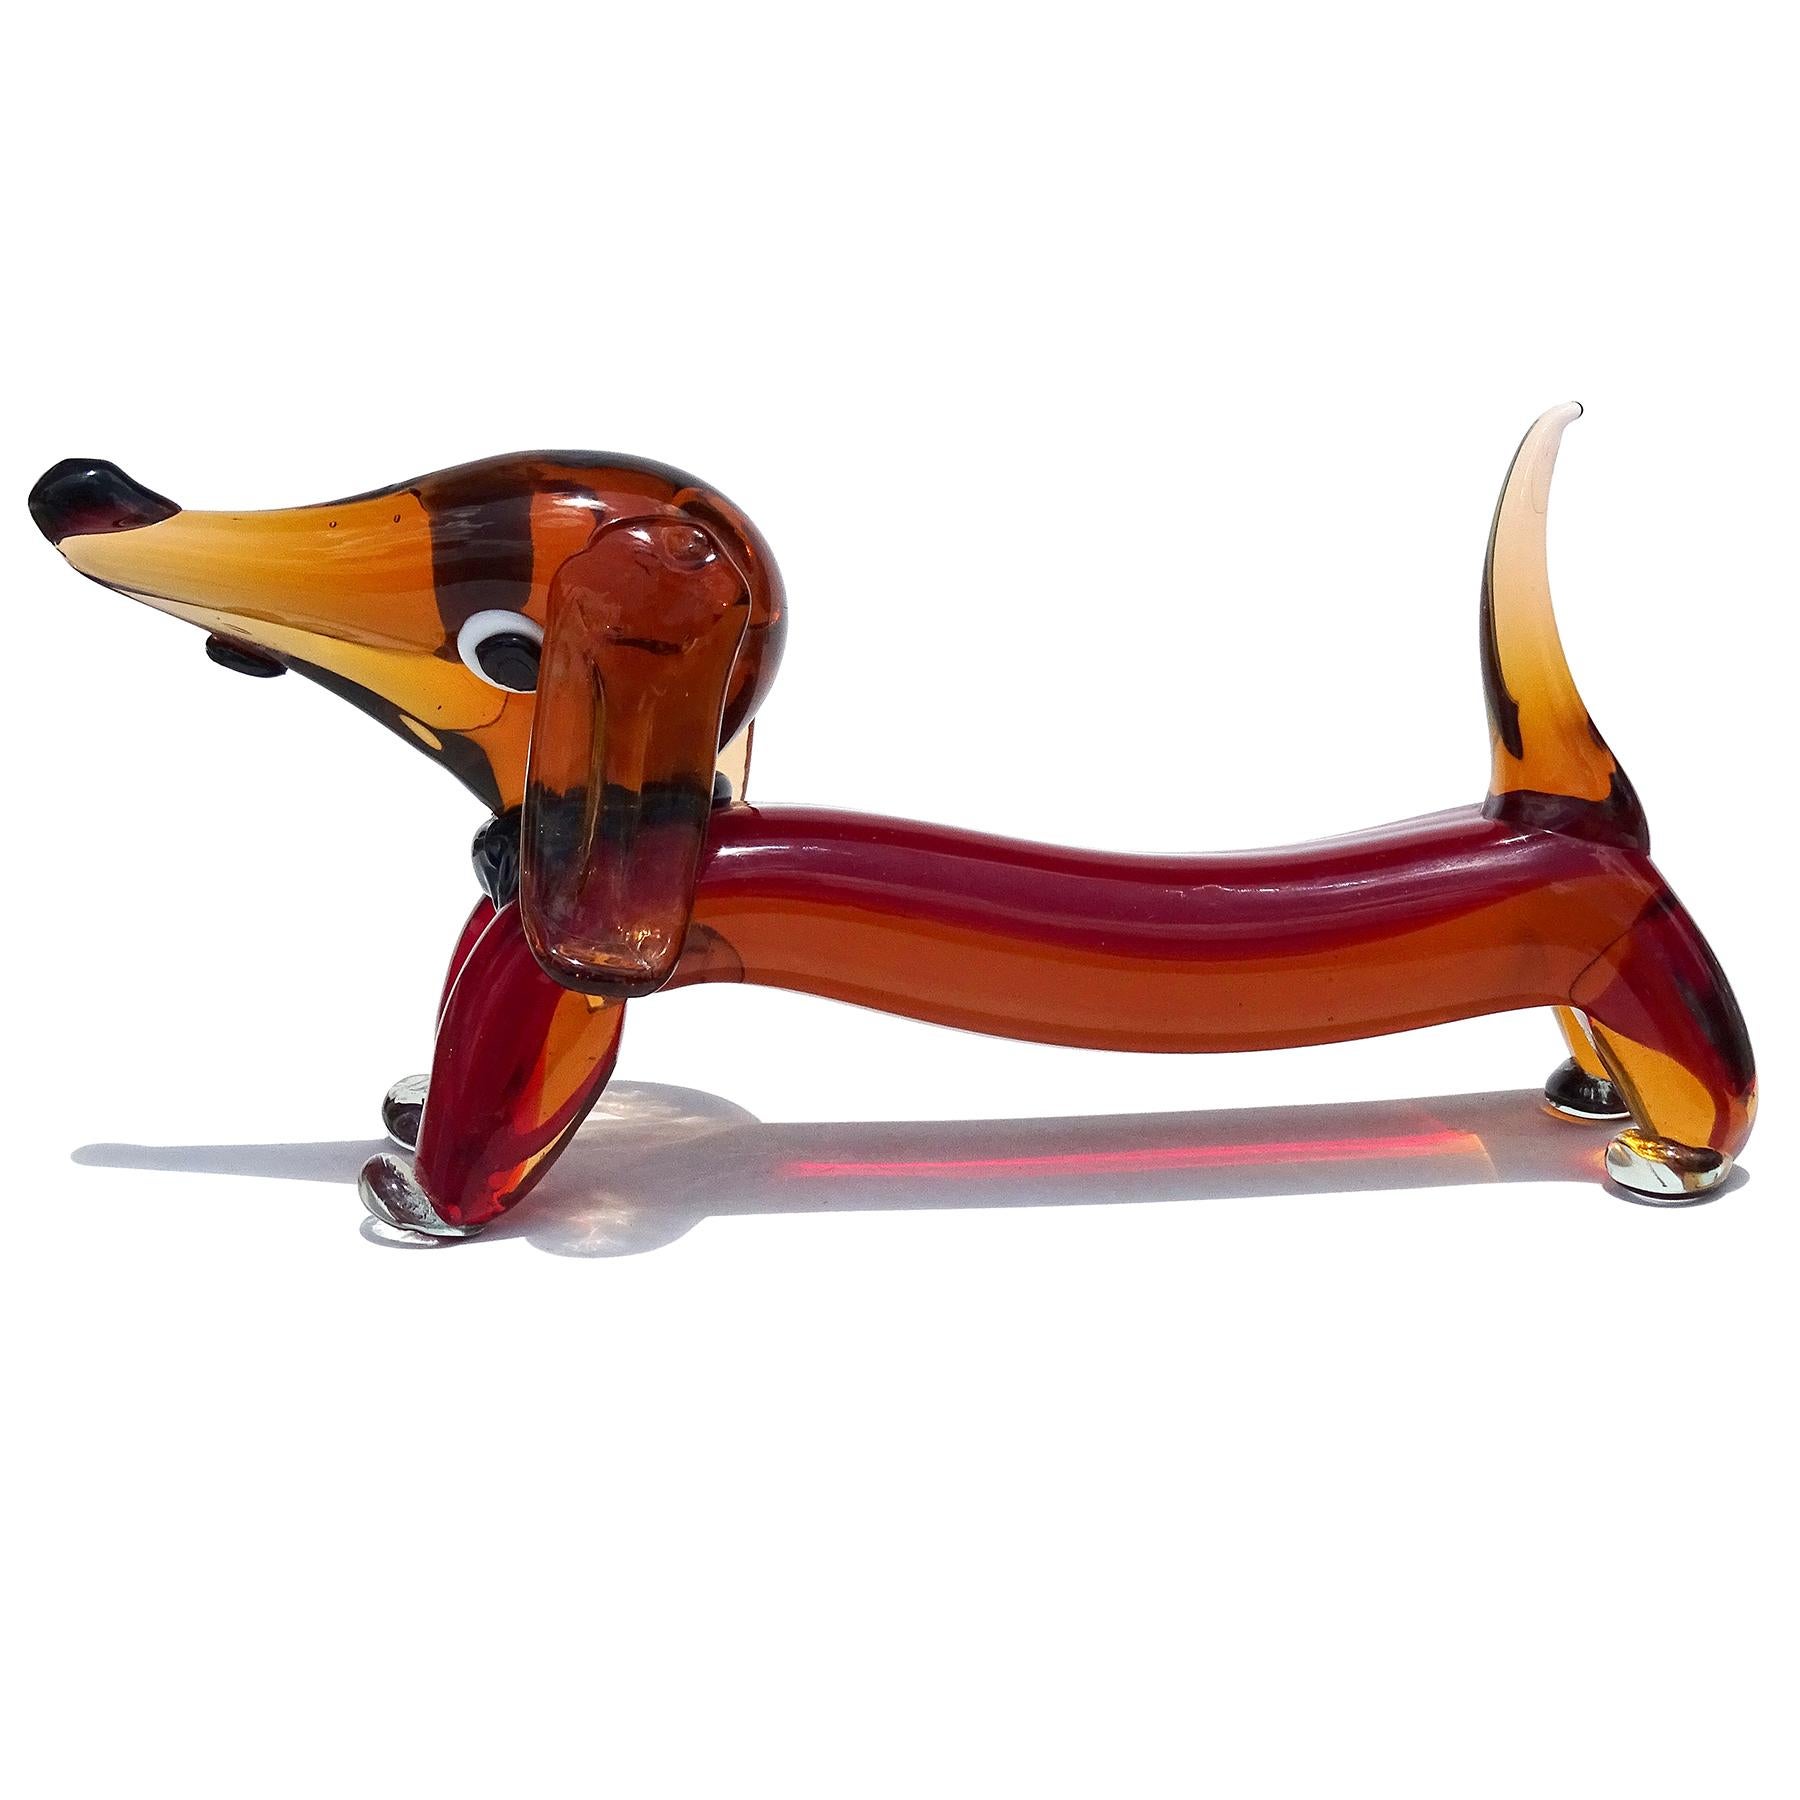 Beautiful, and large, vintage Murano hand blown Sommerso dark orang and red Italian art glass Dachshund puppy dog sculpture. The puppy has a cartoony feel, with black collar, floppy ears, and tongue sticking out. It has very large eyes, and a cute